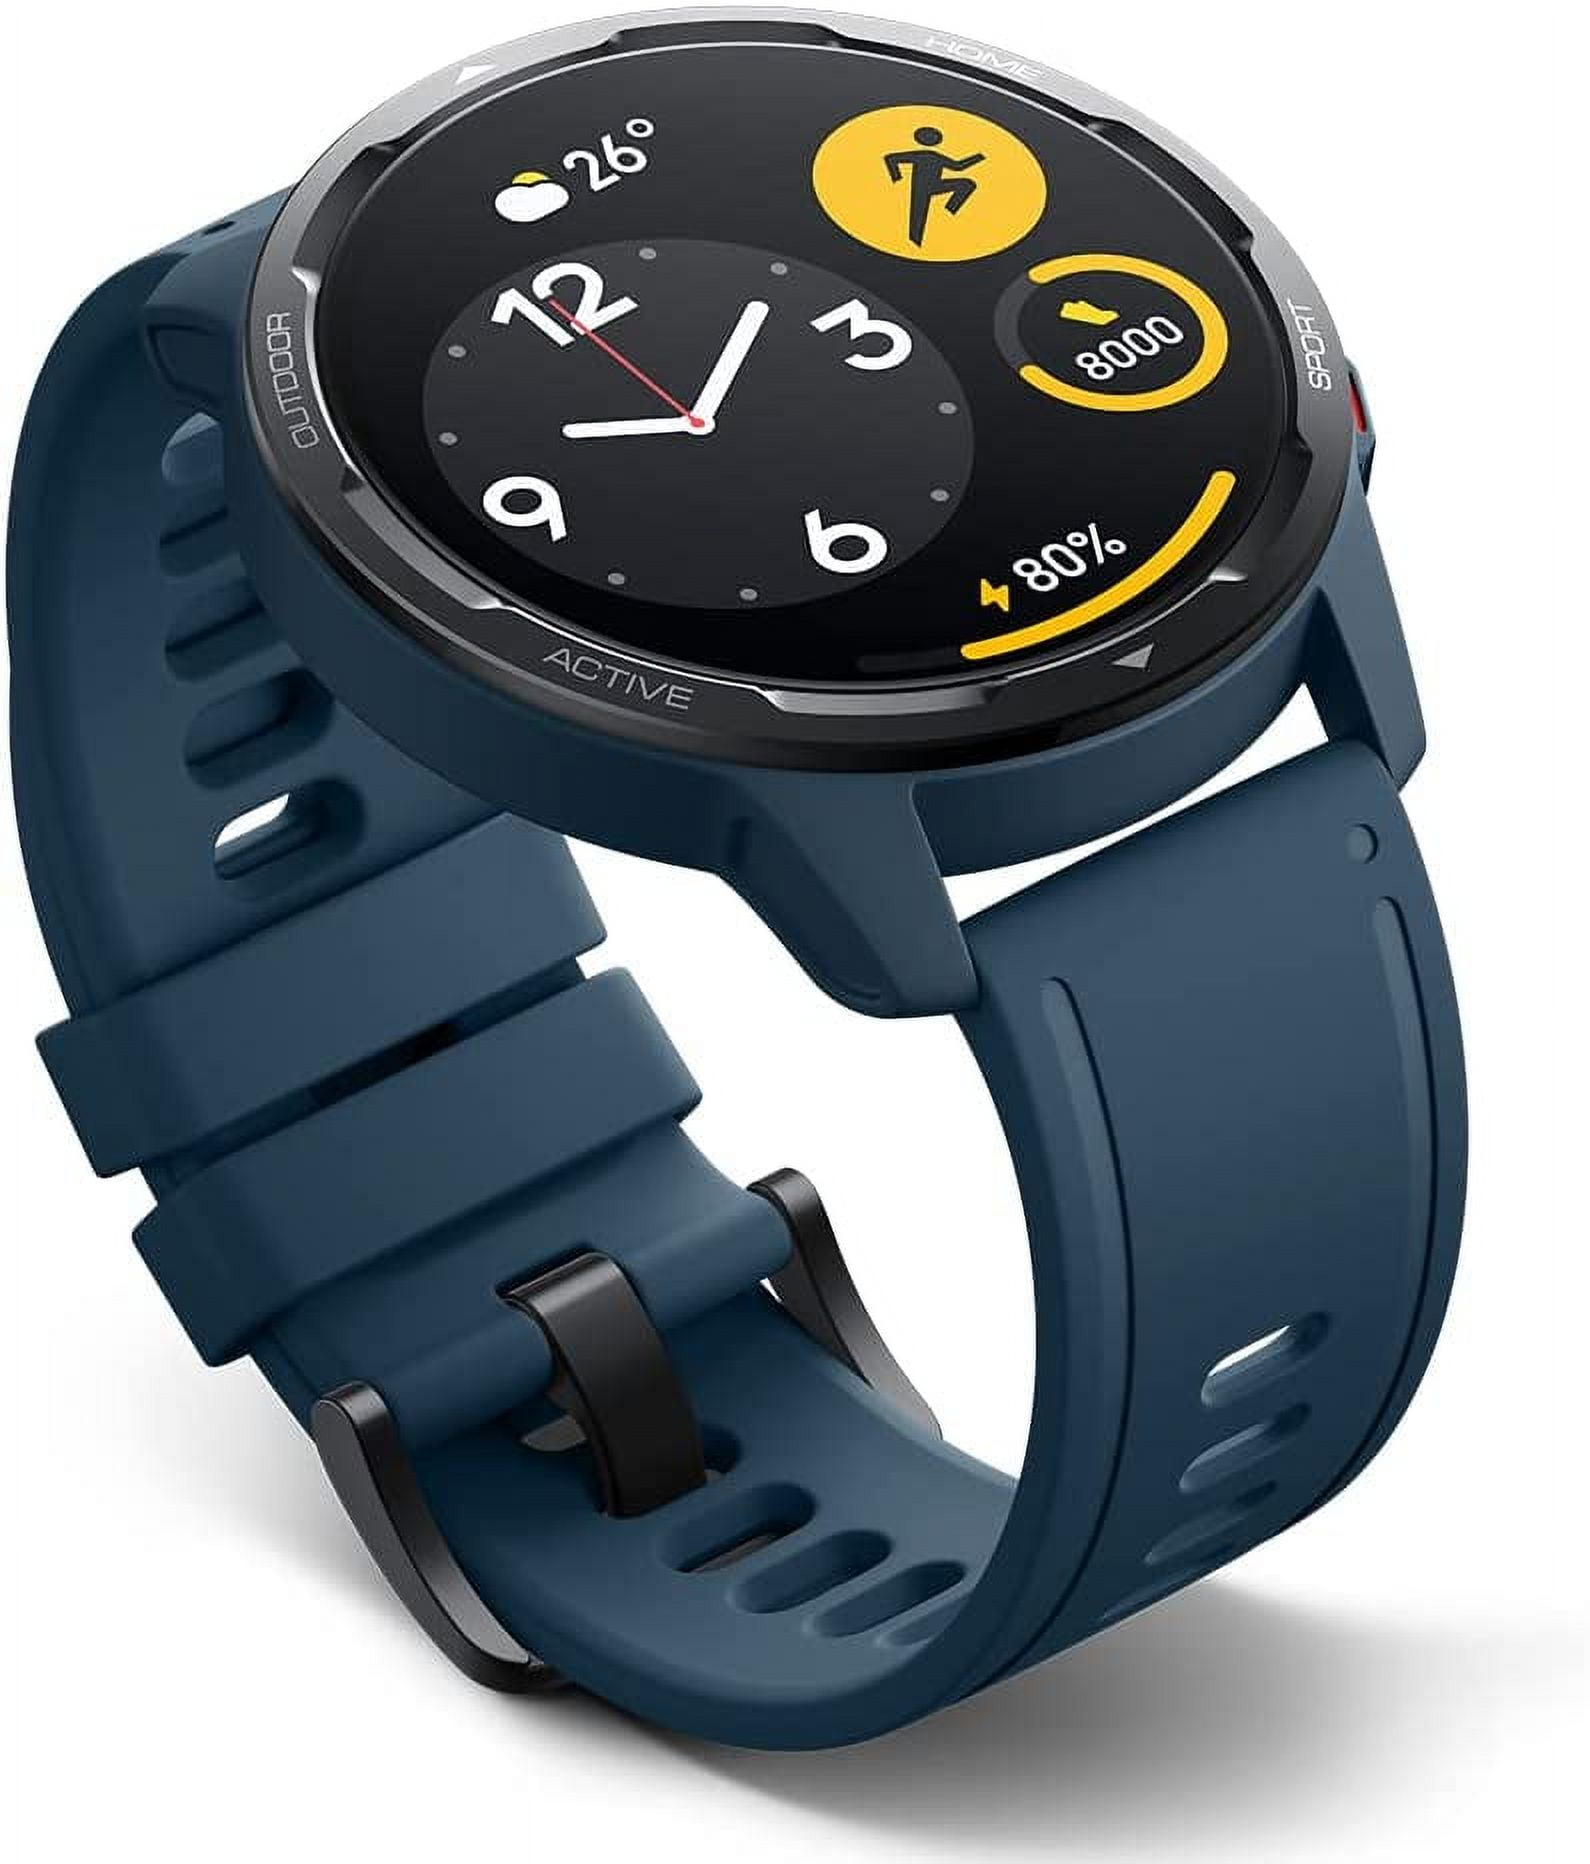 Yappe Store - Xiaomi Watch S1 Active smartwatch features a